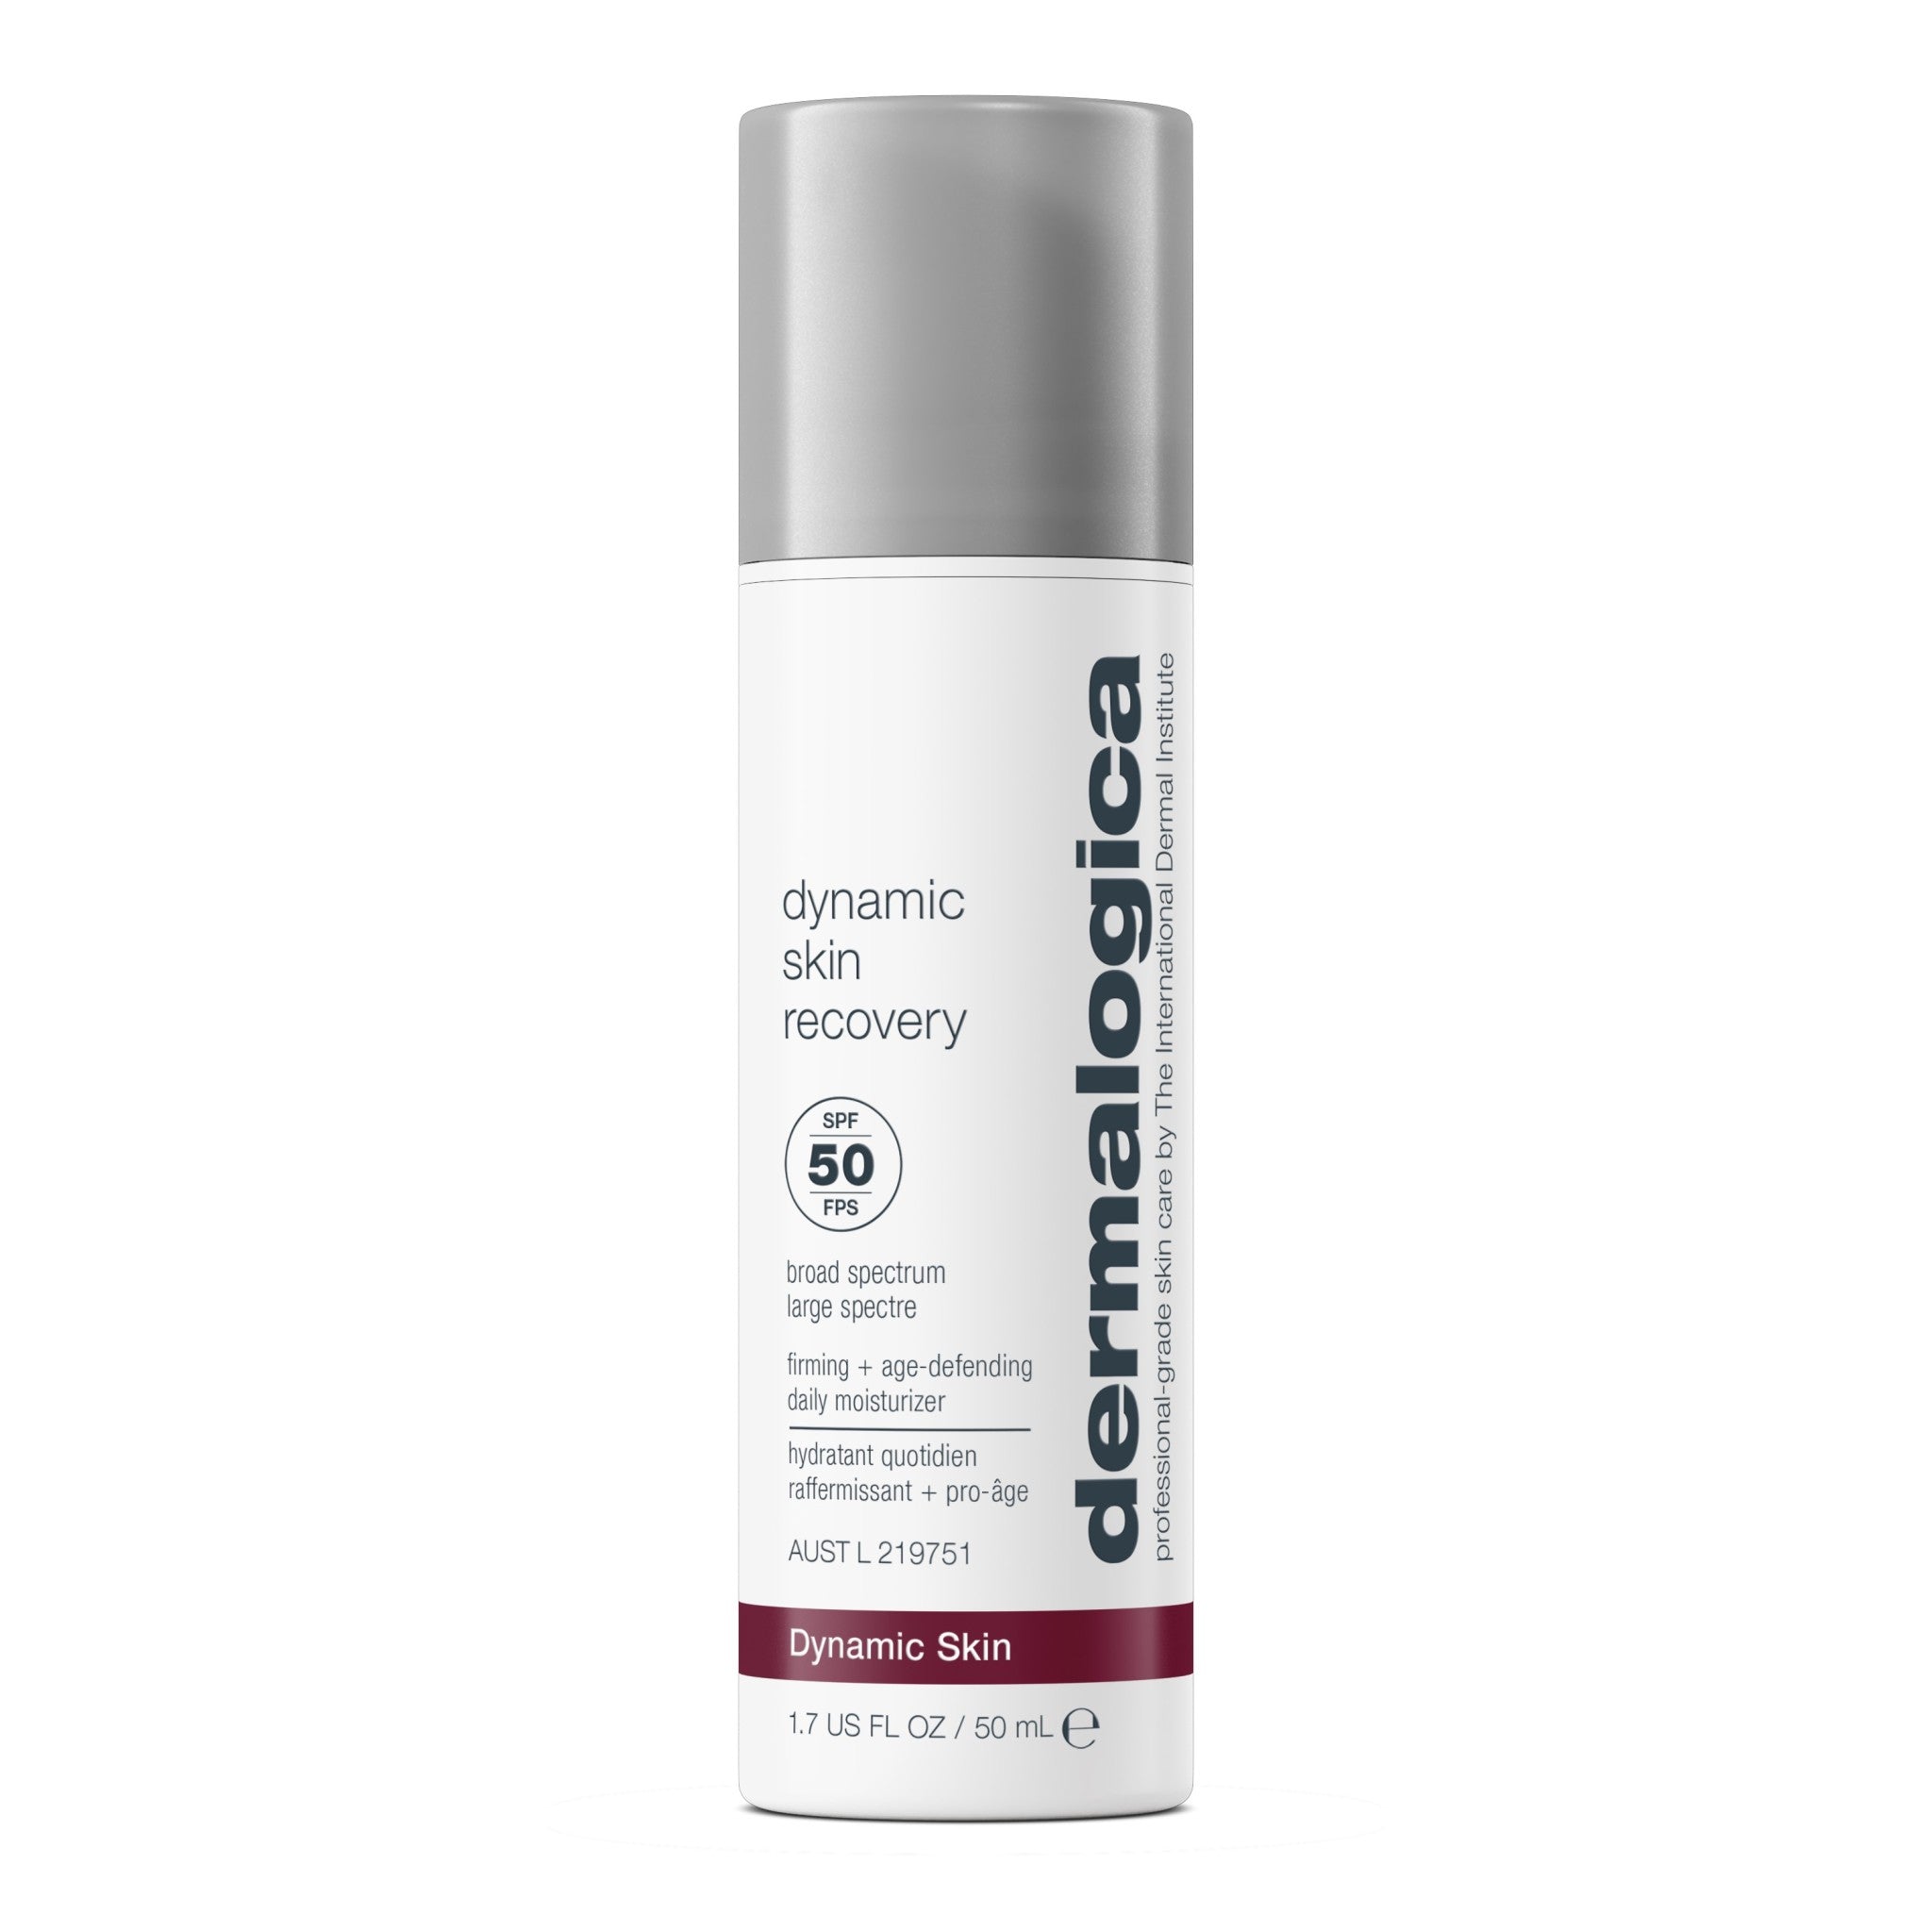 Dermalogica Dynamic Skin Recovery SPF 50 main image.